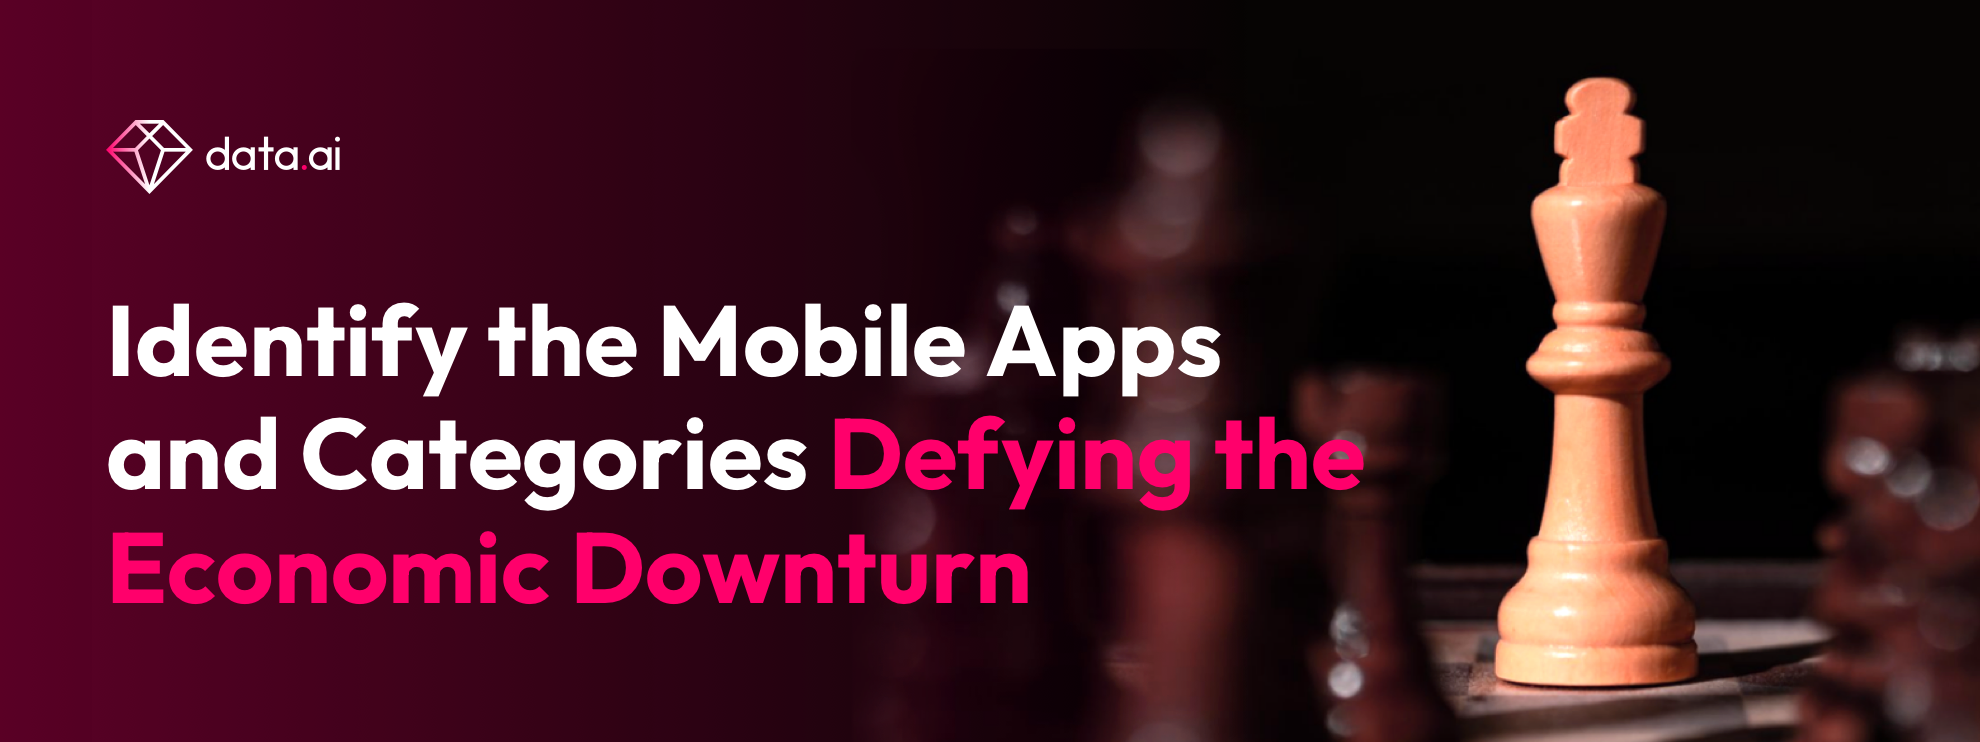 Identify the Mobile Apps and Categories Defying the Economic Downturn